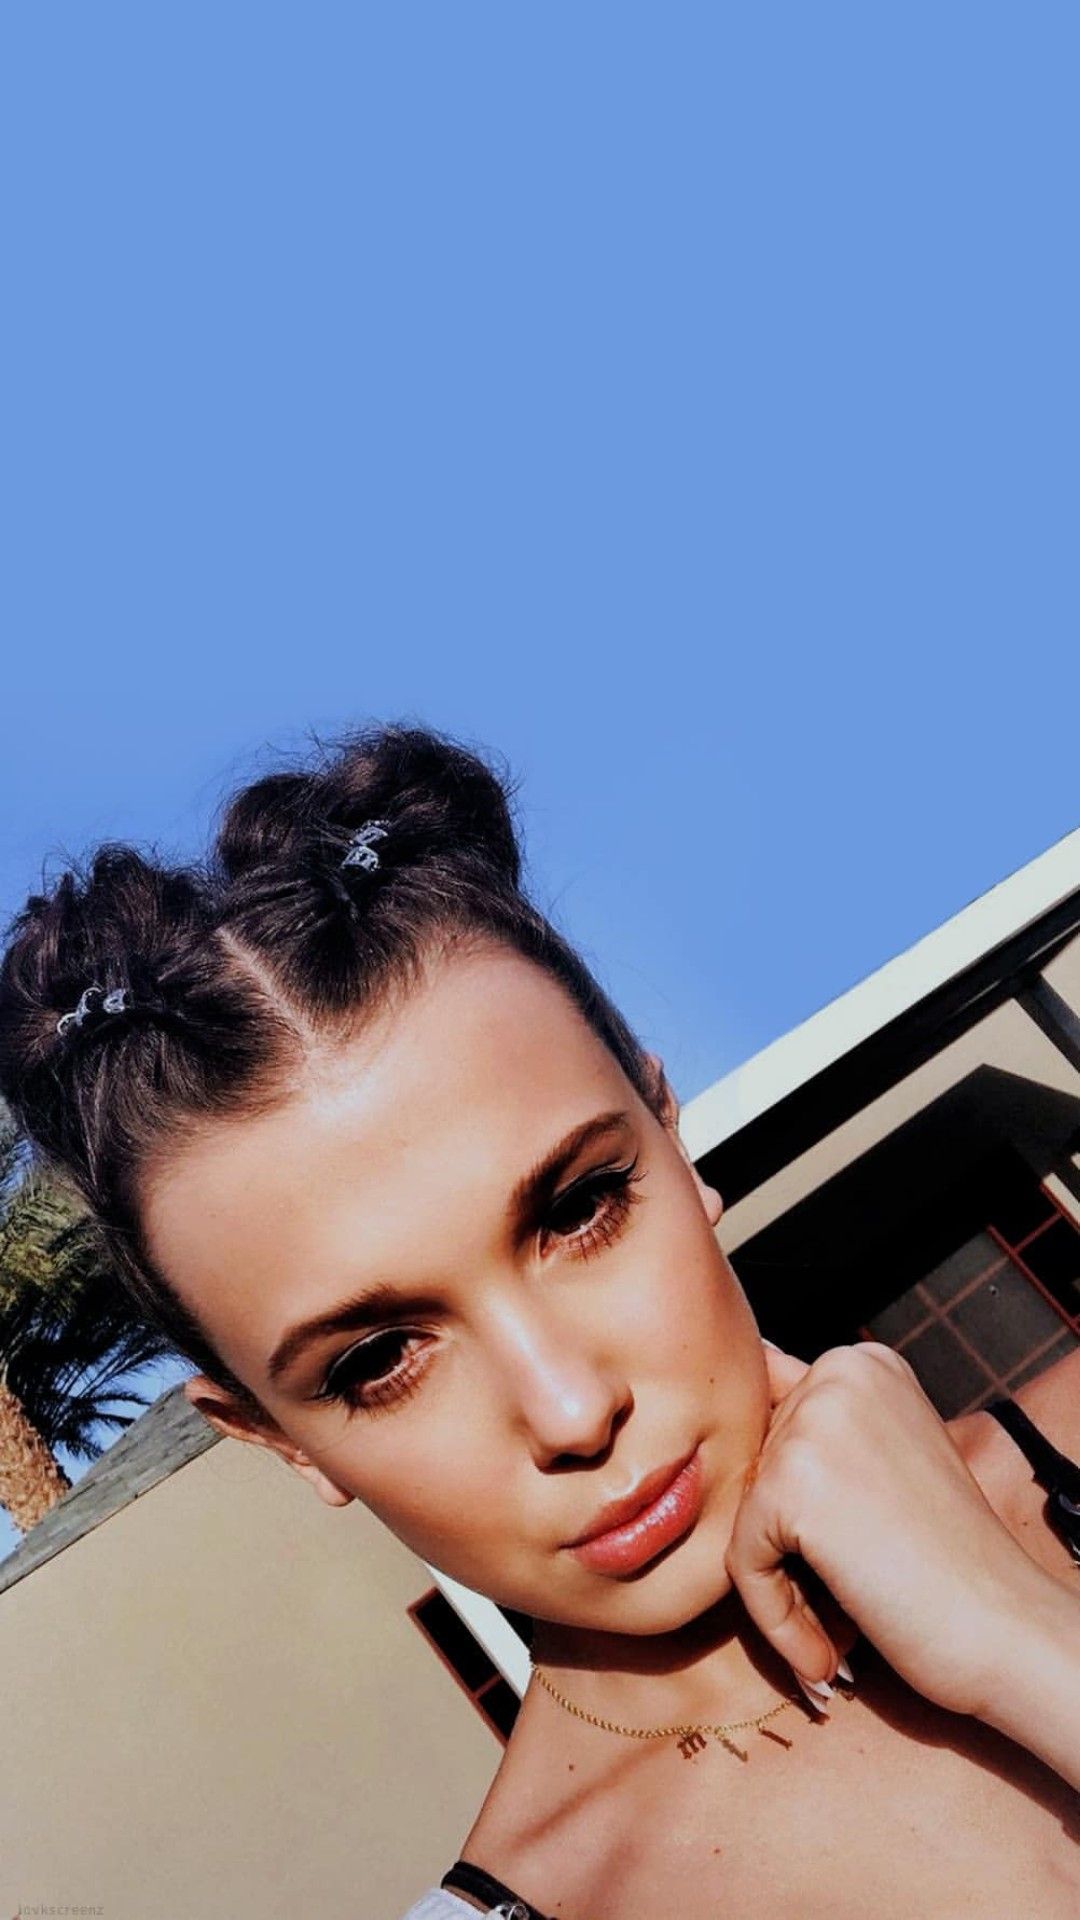 🔥 Download Millie Bobby Brown Wallpaper In Fondos By Bettylewis